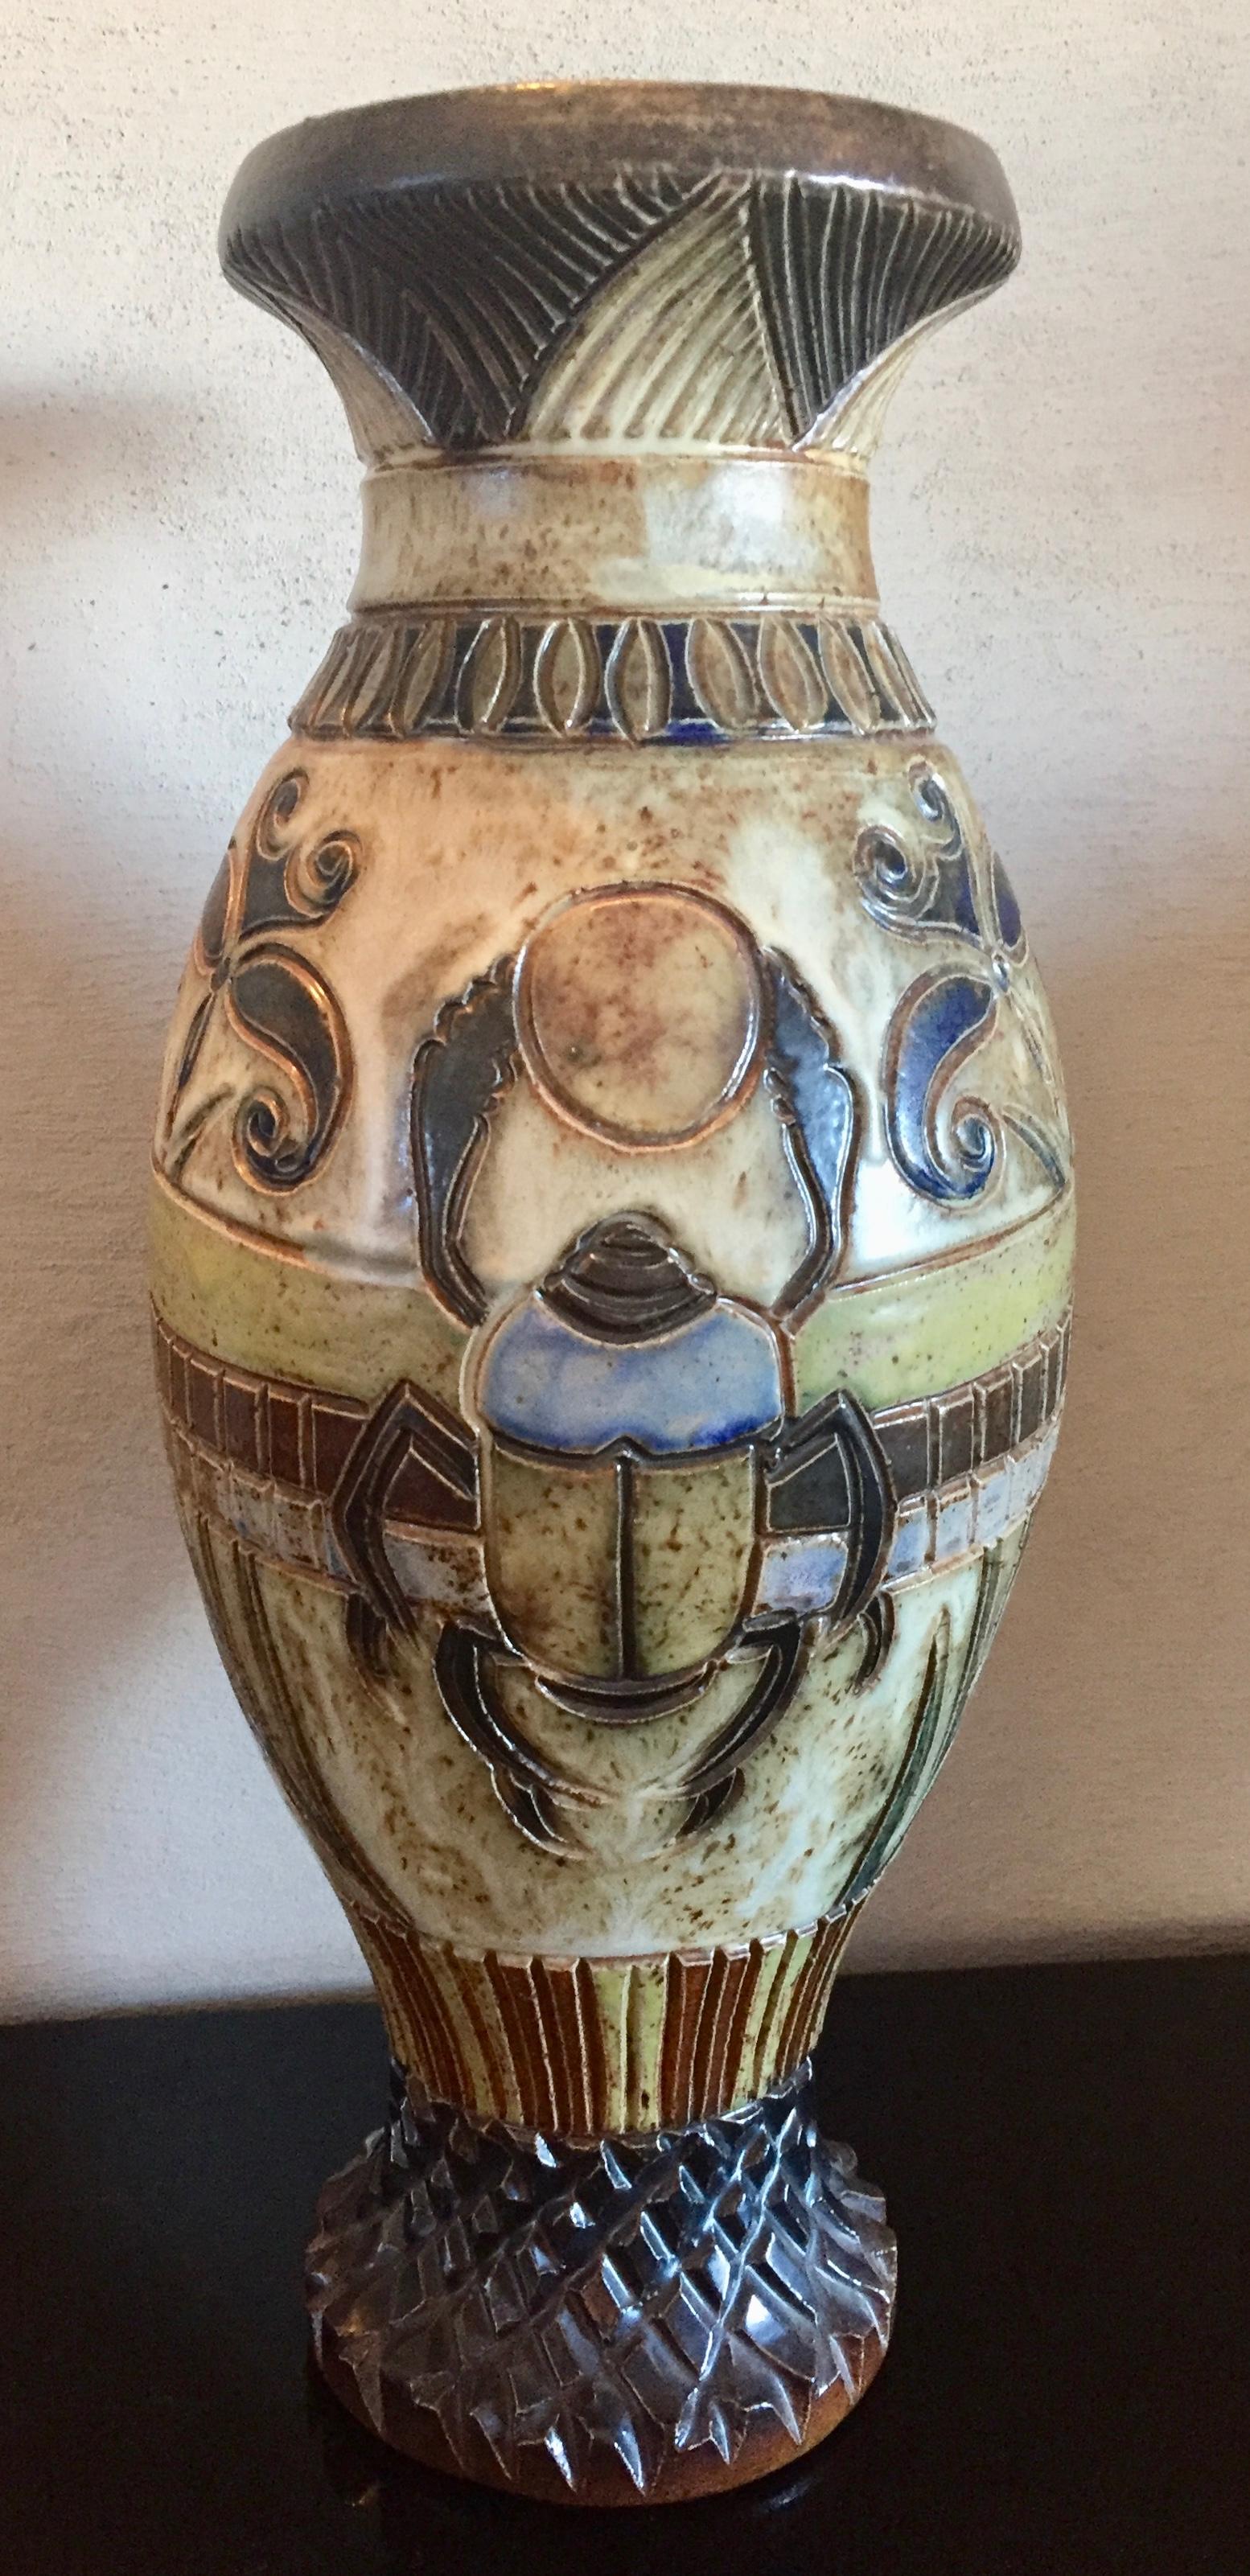 An outstanding collection of 10 large Guerin pottery vases and vessels in the much sought after Greek and Egyptian designs by Roger Guerin. These pieces were made after the Second World War in the atelier of Roger Guérin in the Belgian town of